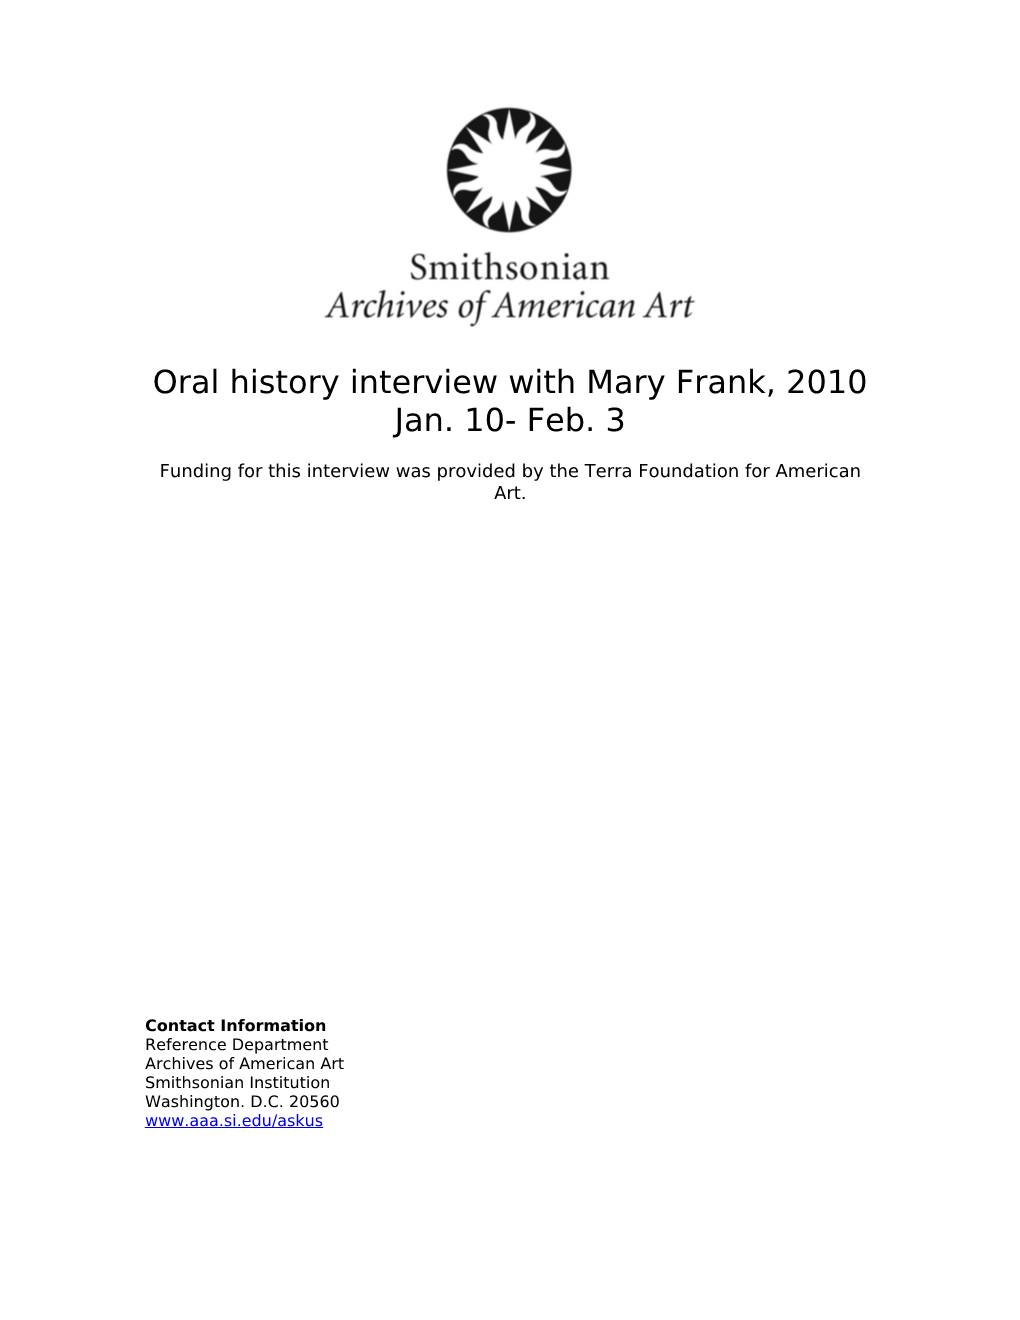 Oral History Interview with Mary Frank, 2010 Jan. 10- Feb. 3